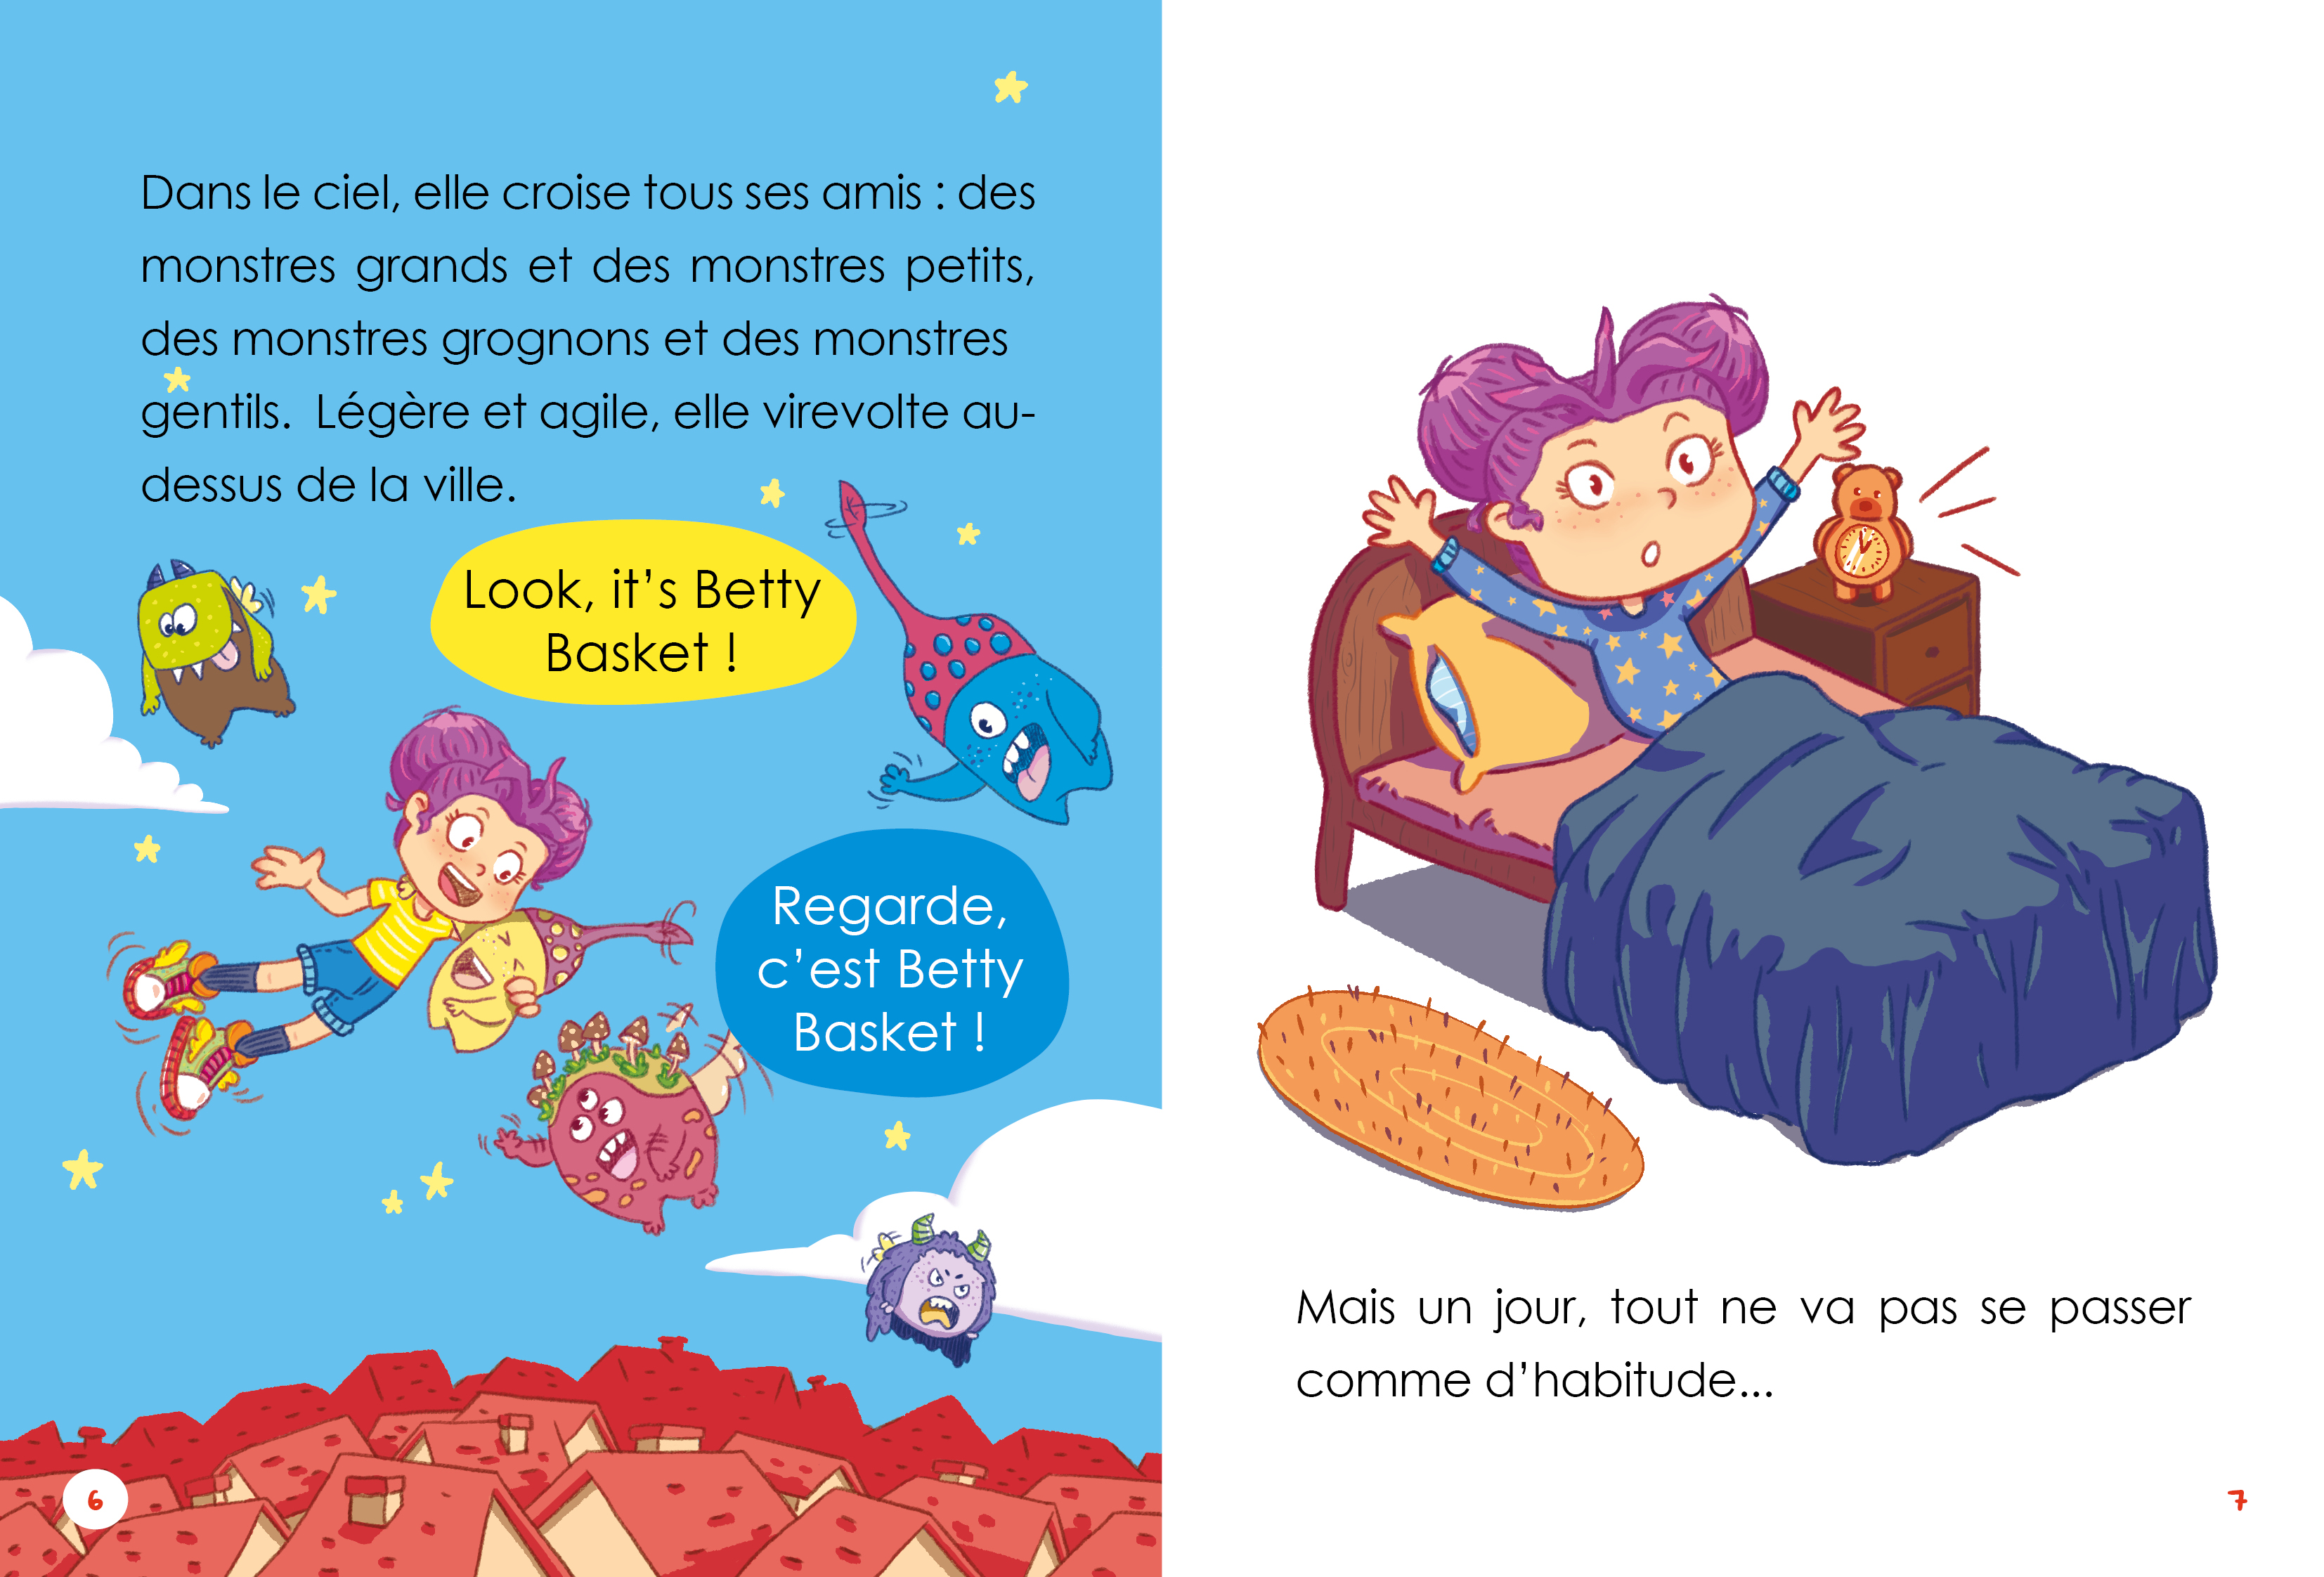 Monsters And Magic. Betty Basket